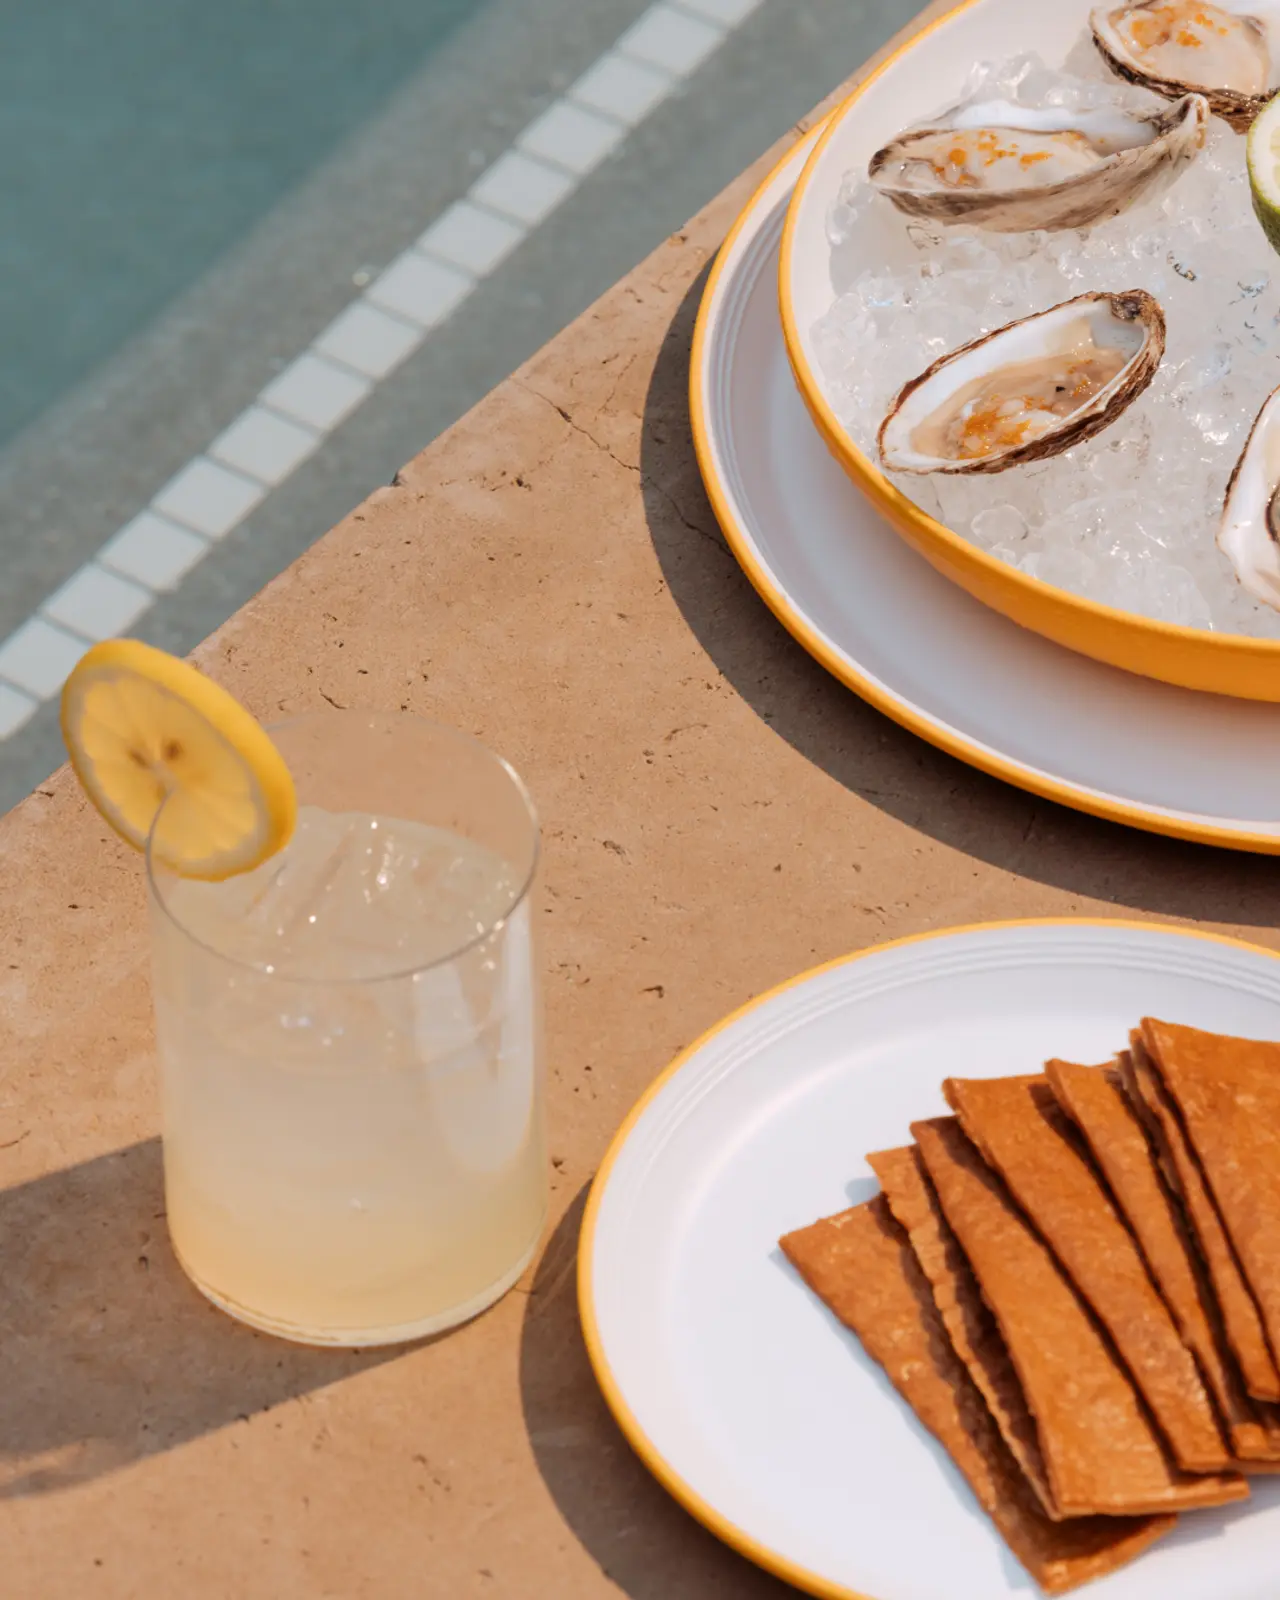 A refreshing beverage with a lemon slice accompanies a platter of oysters on ice and crisp crackers by a poolside.